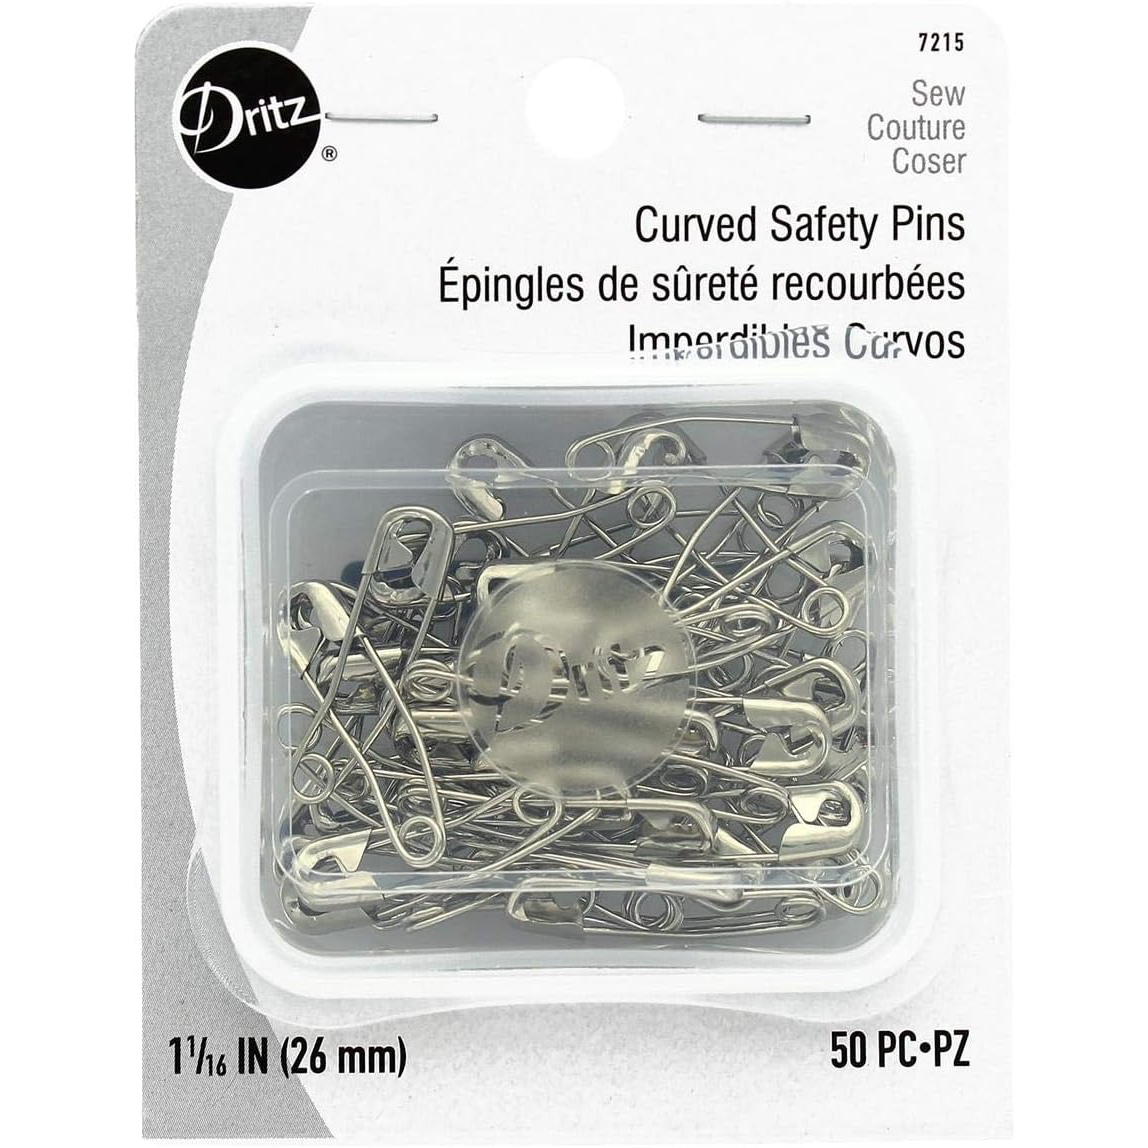 50 Curved Safety Pins 1" Dritz